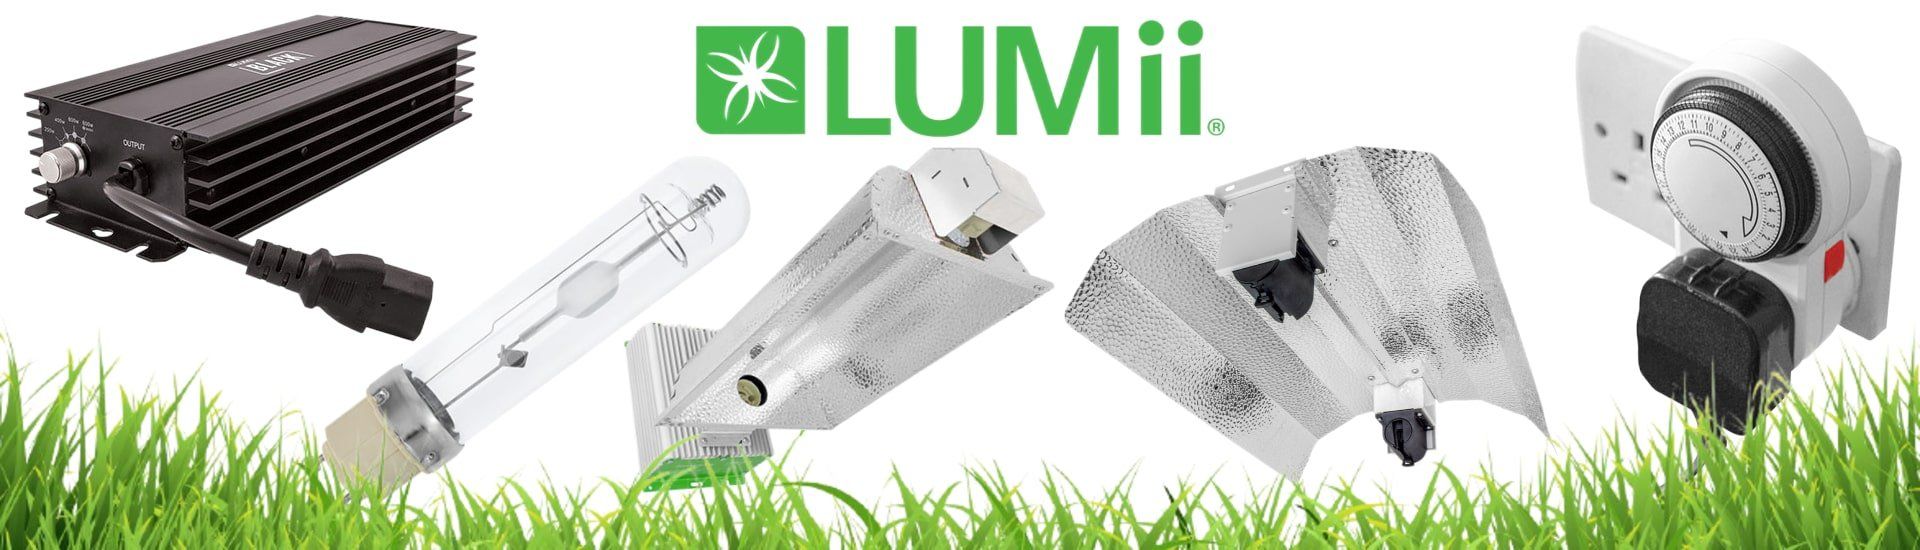 LUMii is a range of quality lighting products for growing plants both indoors and outdoors. The range has been designed by growers, for growers and is packed with unique features to make your life easier and at the same time allow your crops to flourish.